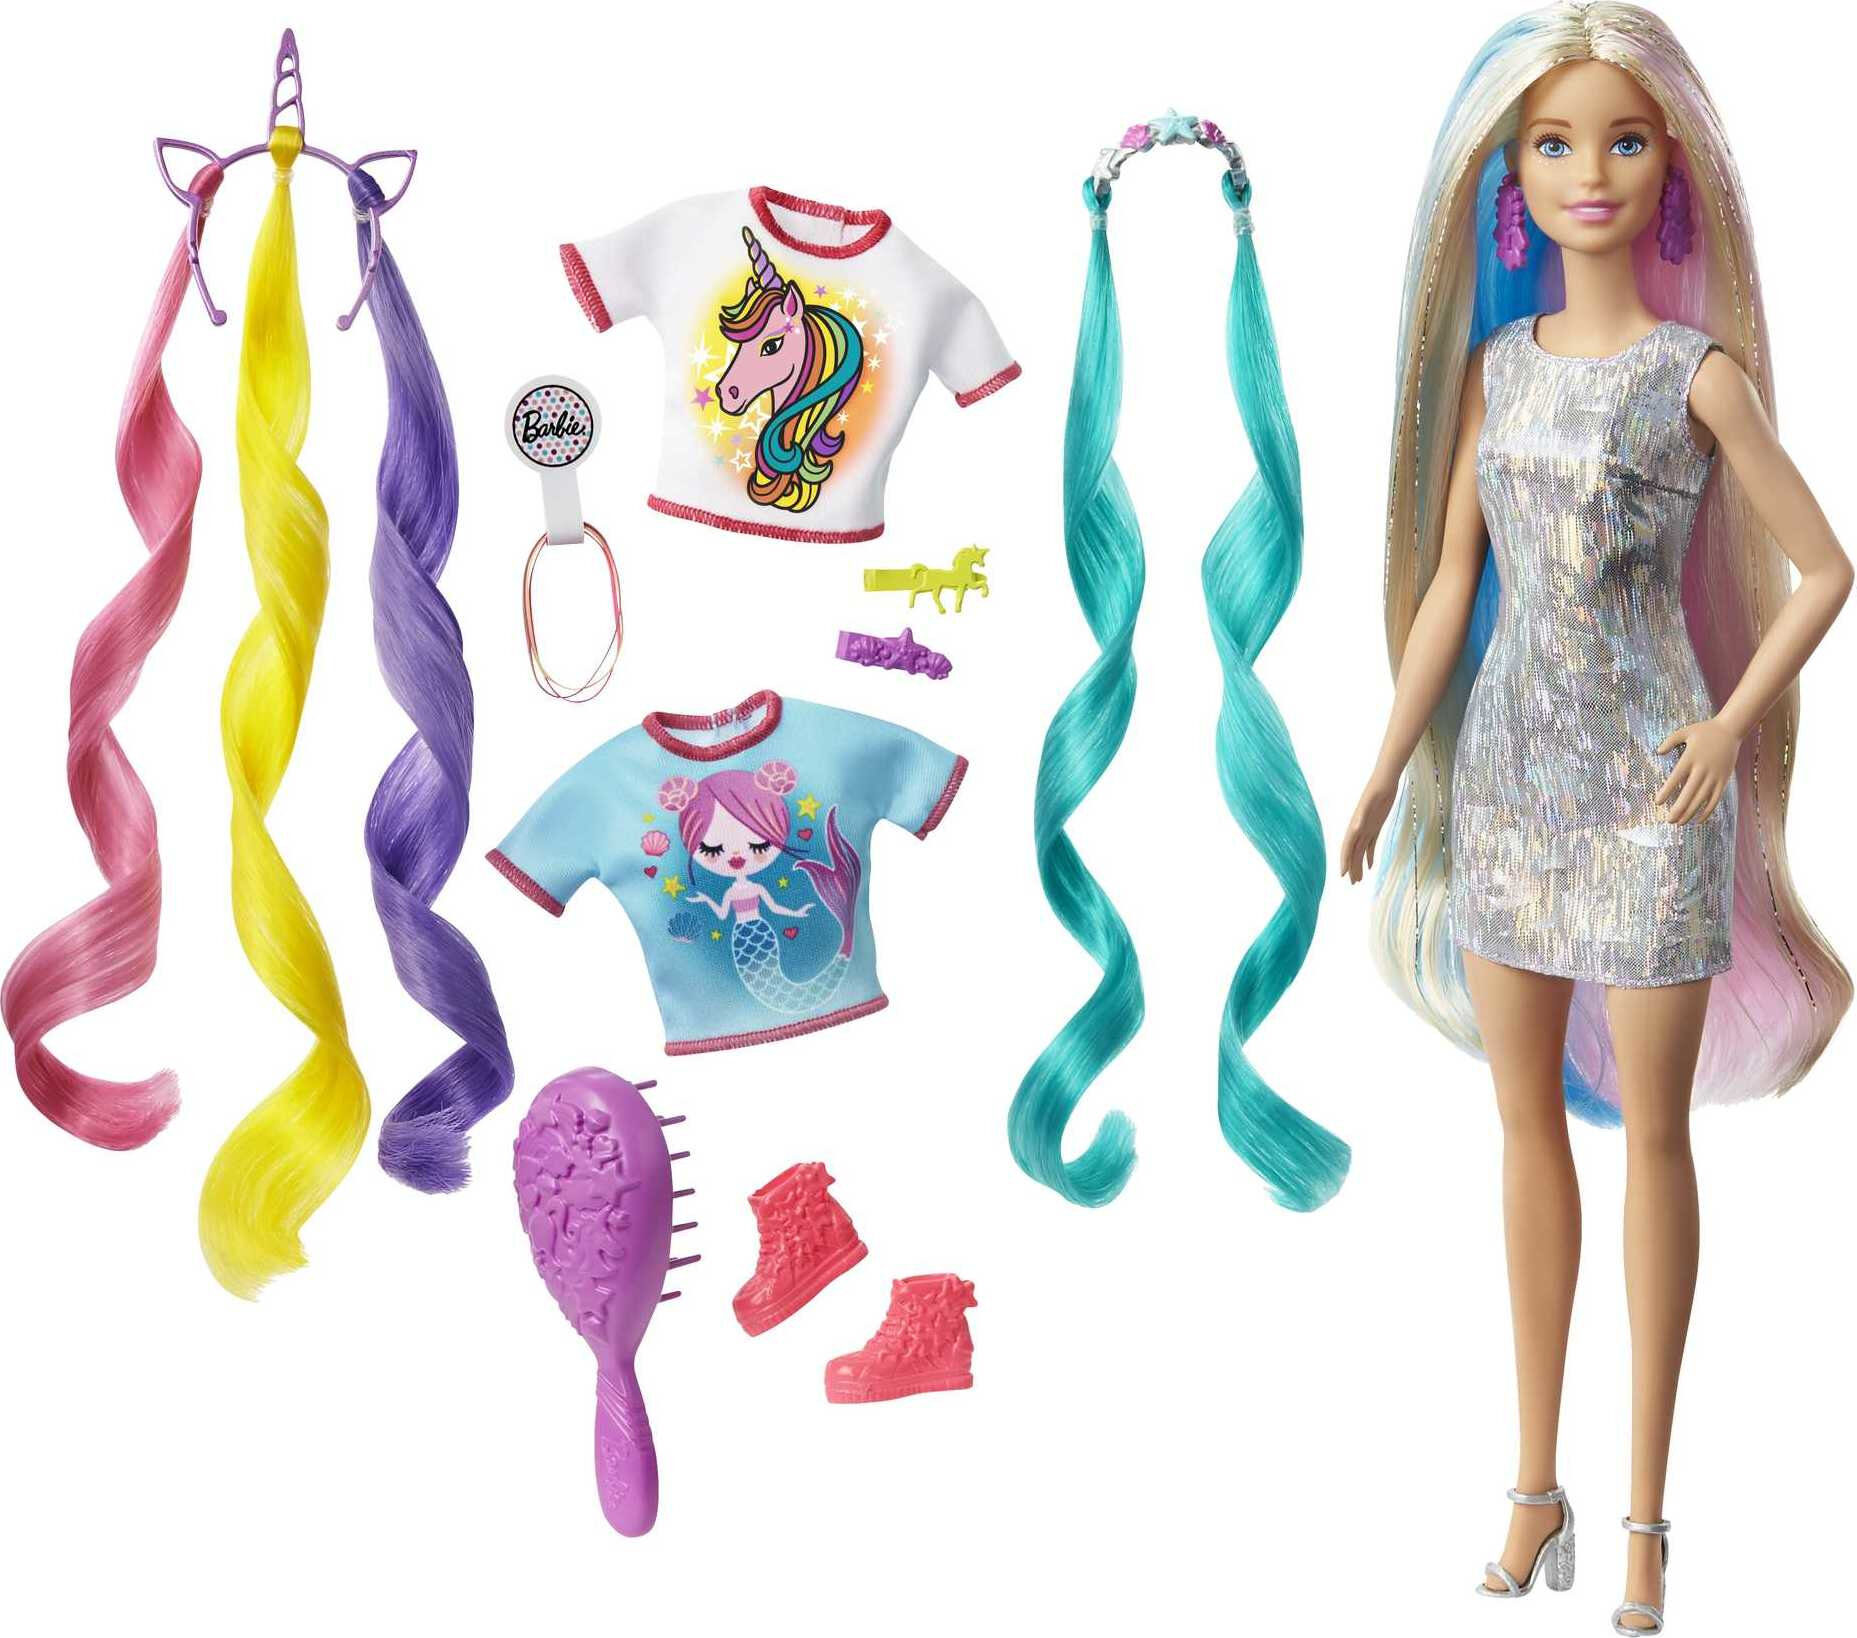 Barbie Fantasy Hair Fashion Doll with Colorful Blonde Hair, Accessories and Clothes - image 1 of 6